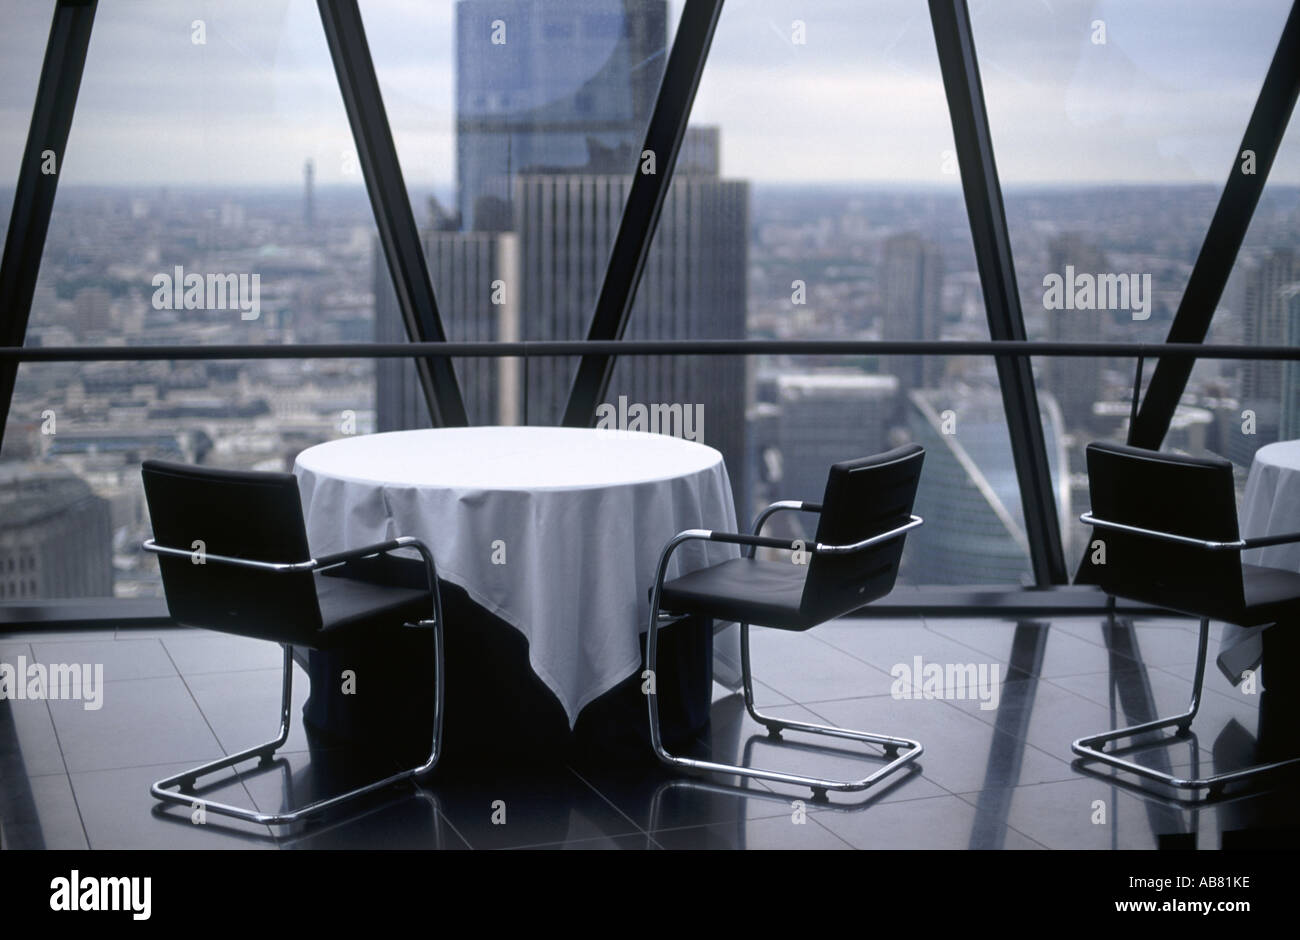 Restaurant at top of The Gherkin (AKA 30 St Mary Axe or Swiss Re Tower) with view to Tower 42 (formerly NatWest Tower), London Stock Photo